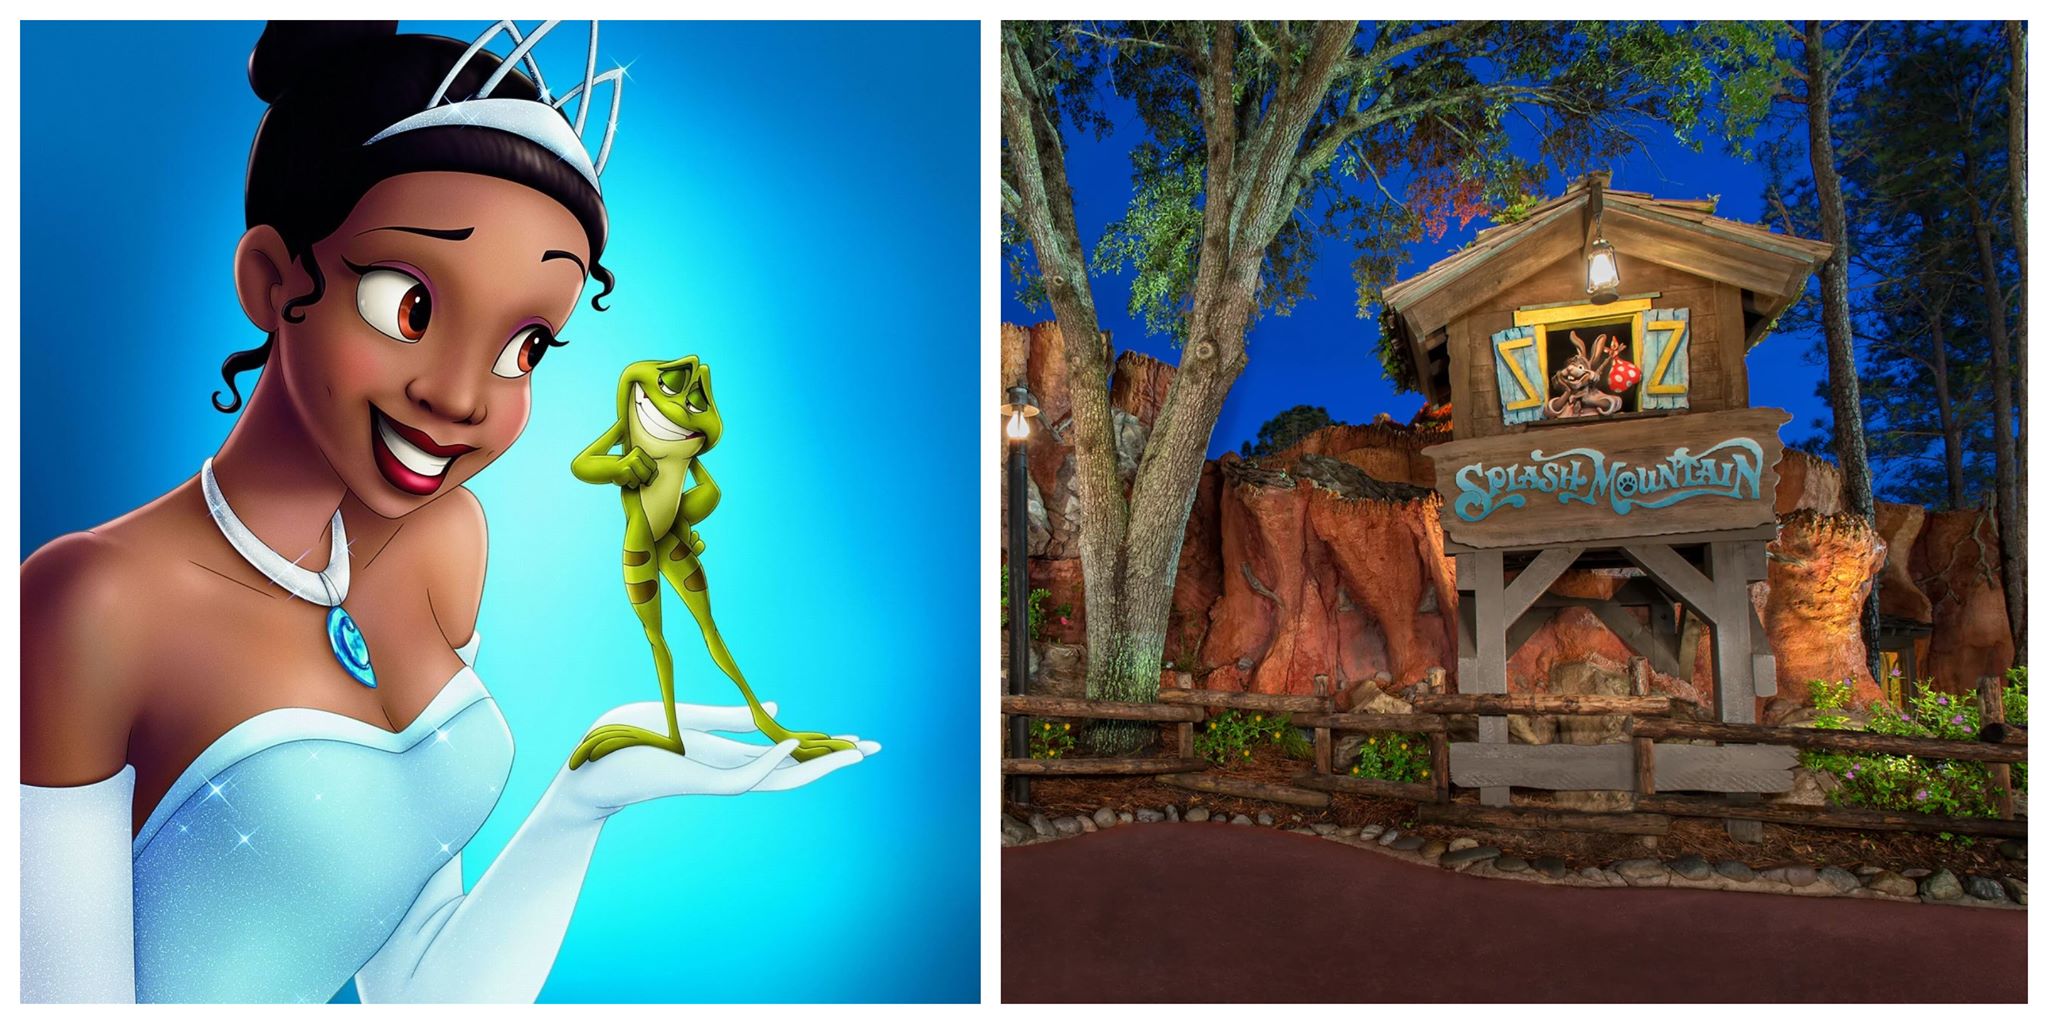 Fans Call For Disney to Re-Imagine Splash Mountain With ‘Princess and the Frog’ Theme